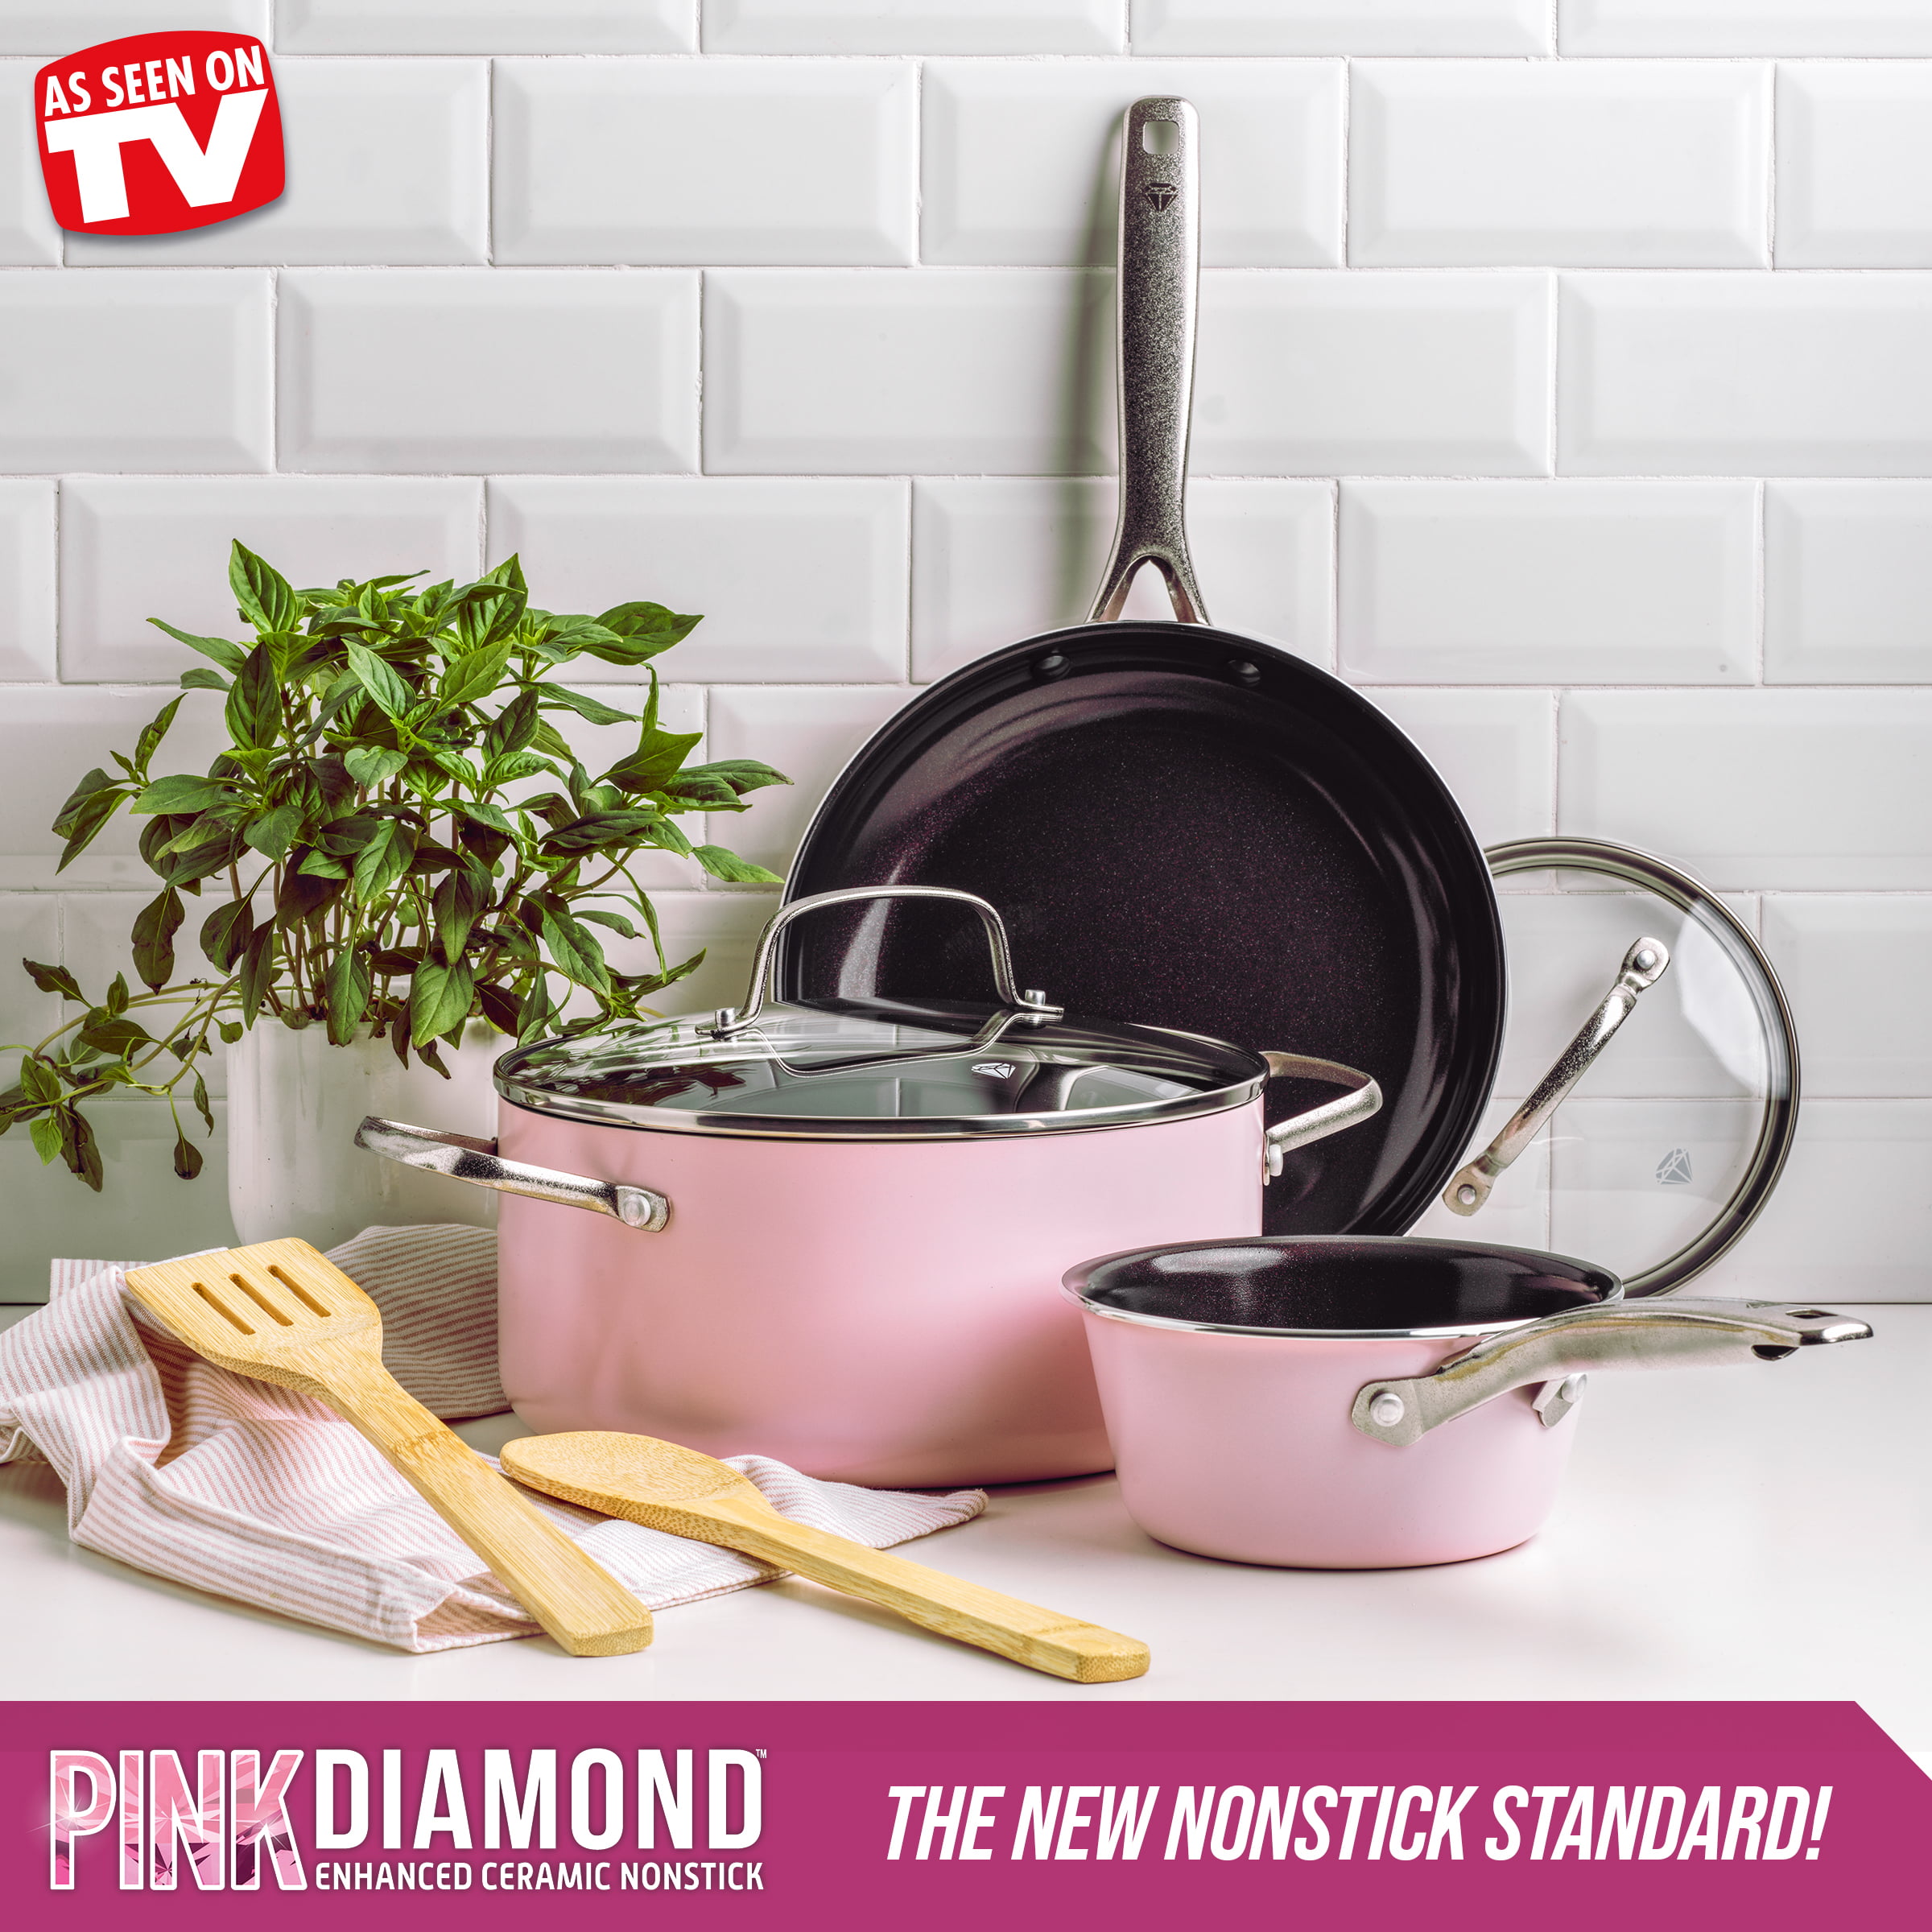 Walmart Corinth - New! As seen on tv item! Get these cookware sets for only  $119 each! Available in Blue Diamond and Pink Diamond! #wm105